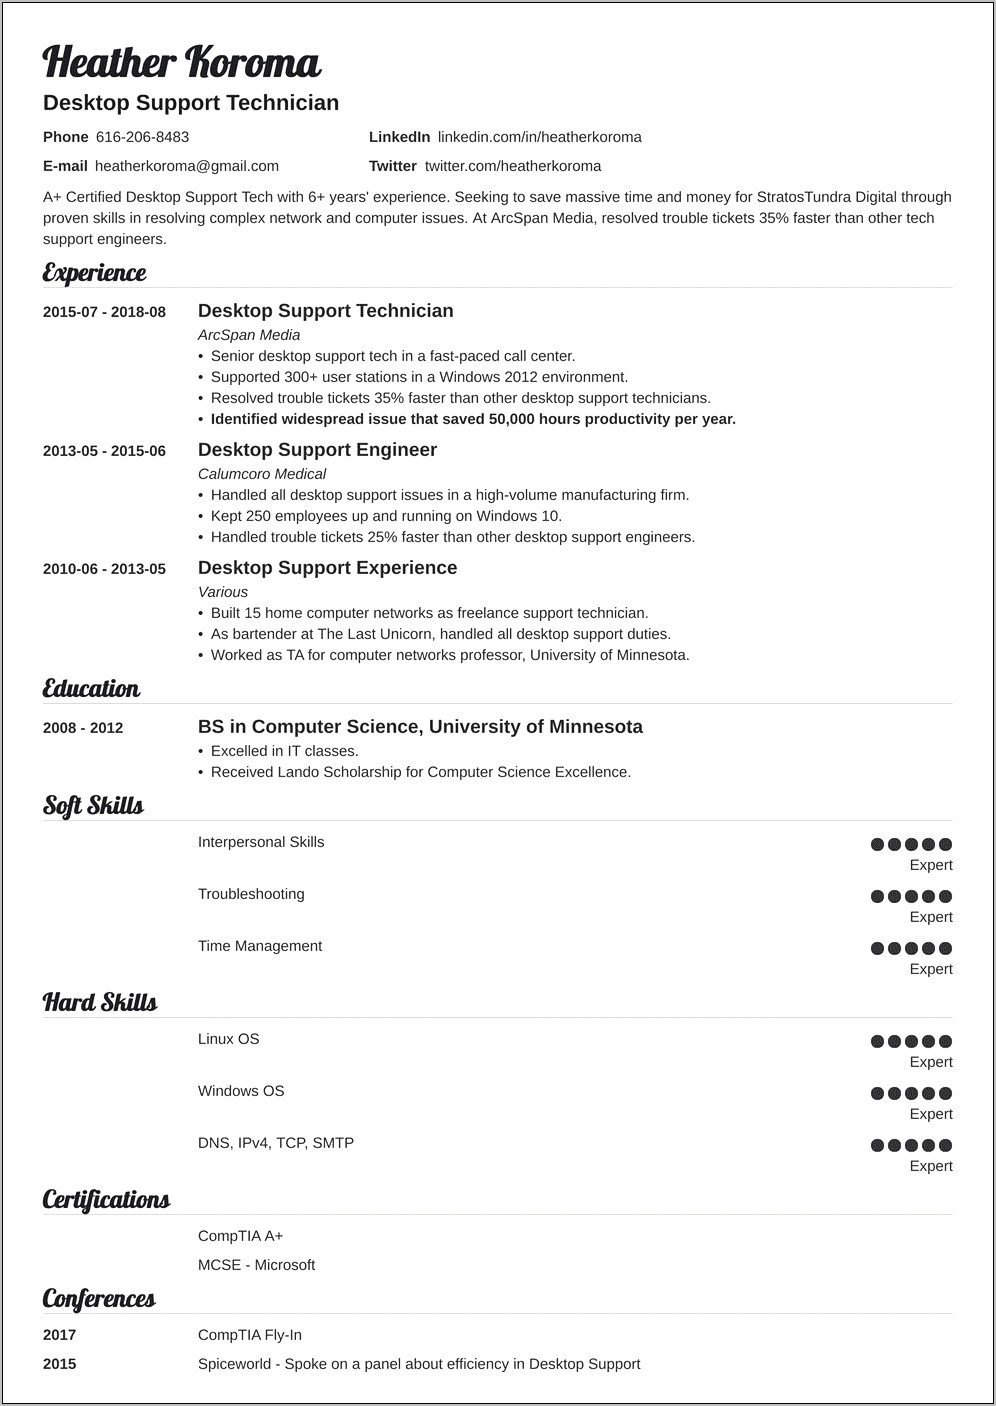 Line Cook Resume Template Downloads Word